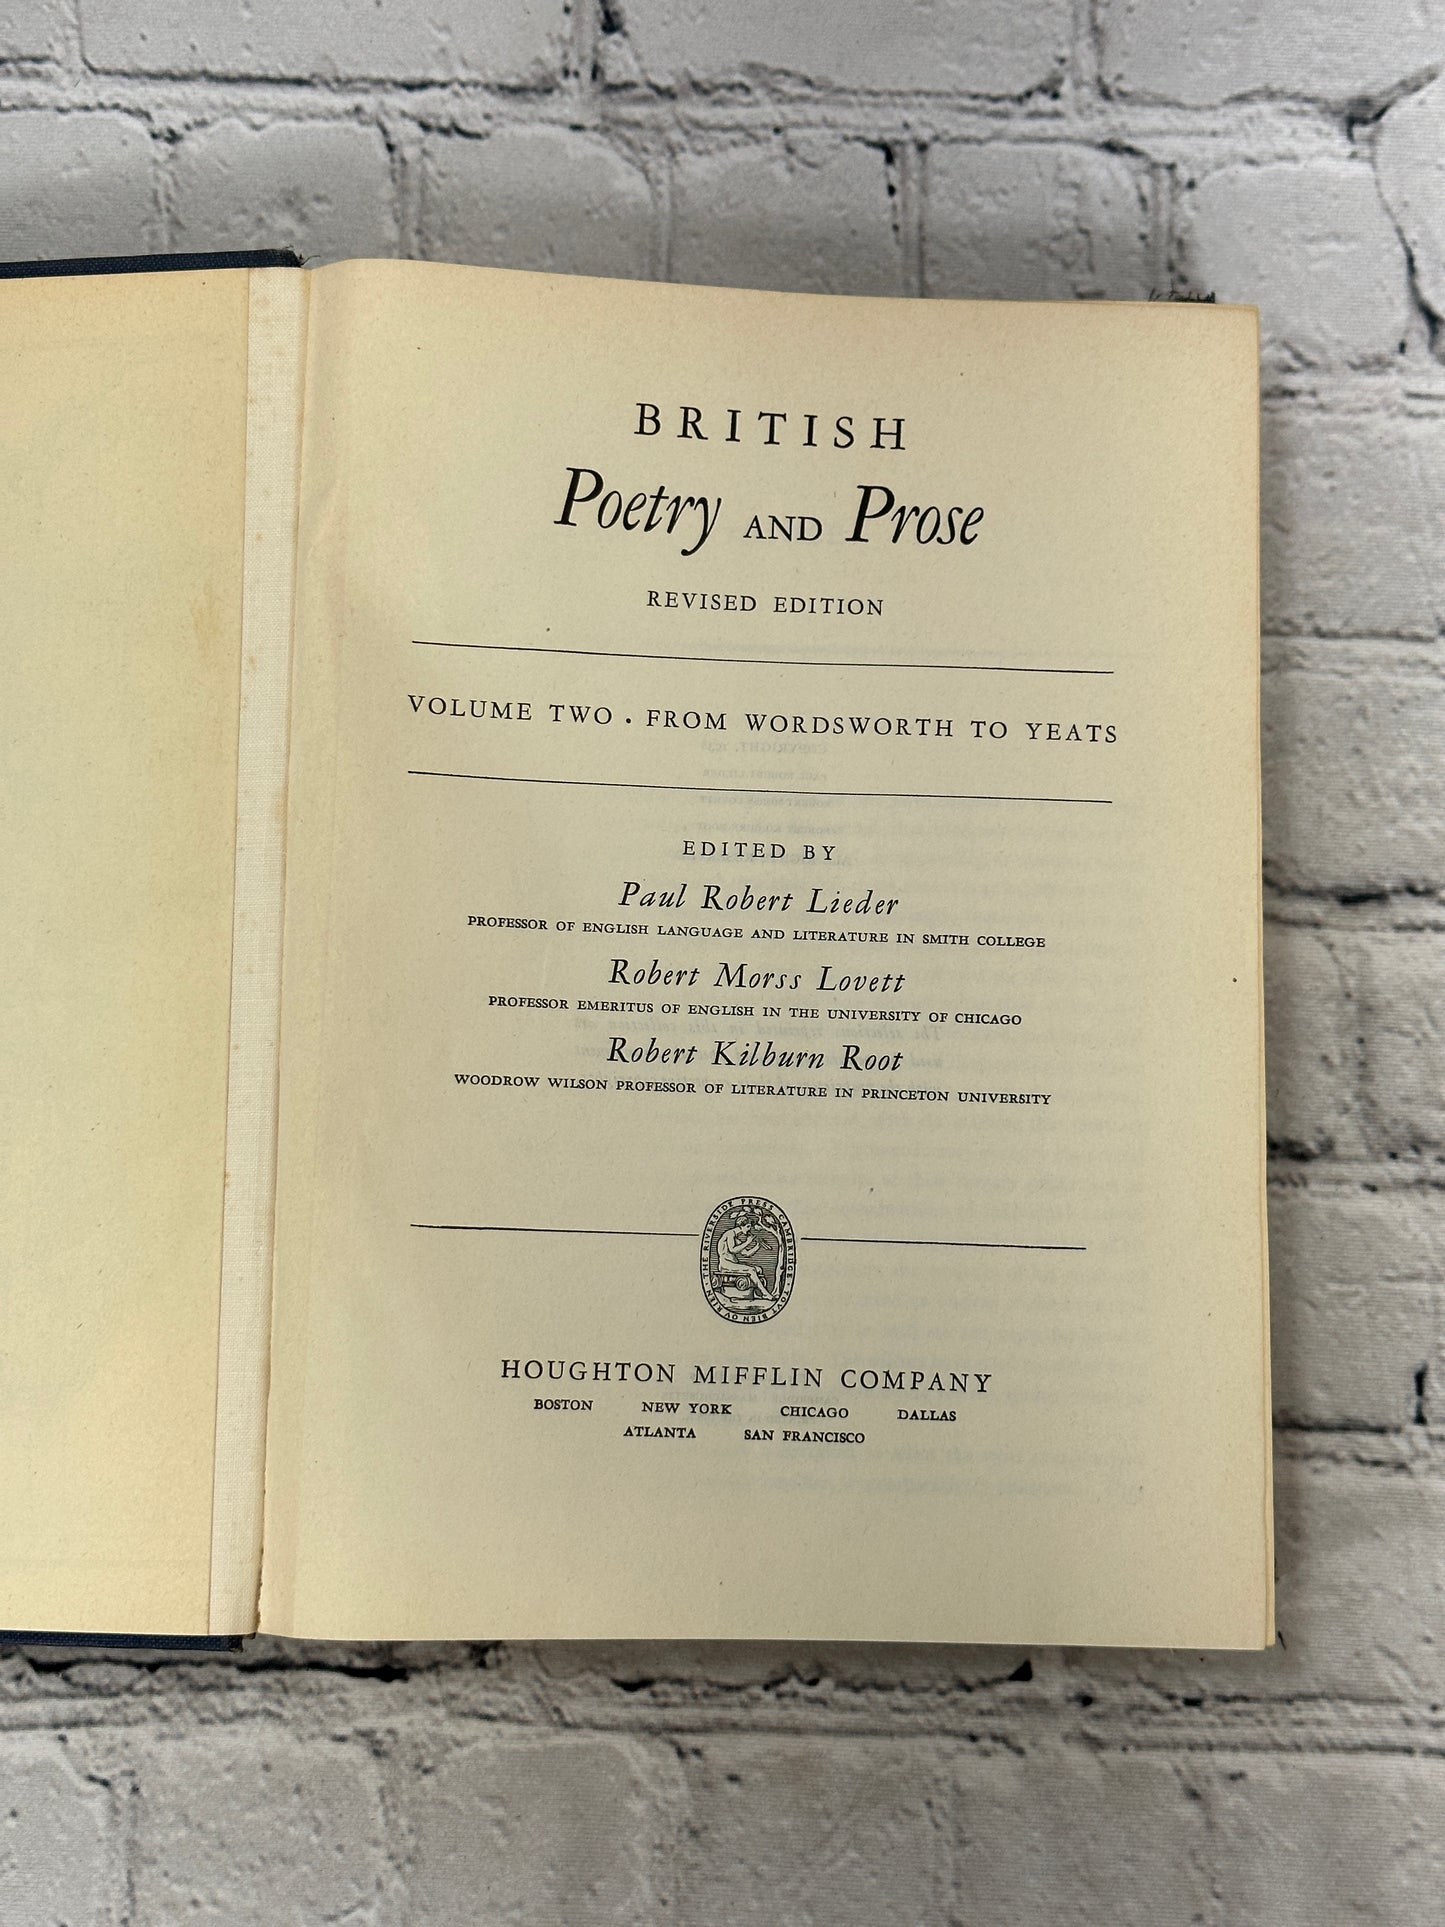 British Poetry And Prose by Lieder, Lovett et al [1938 · Revised Edition]